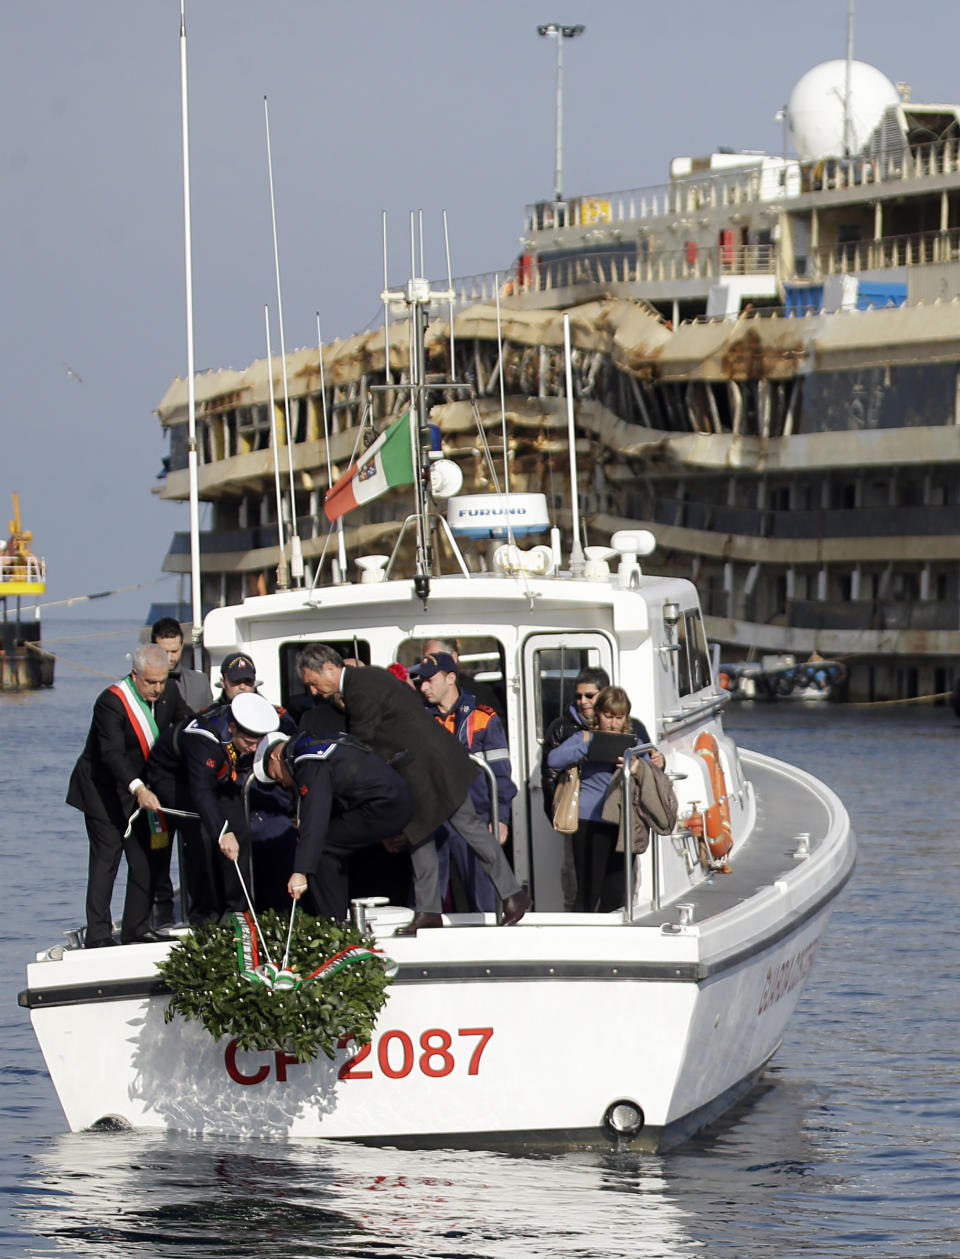 A wreath is being lowered into the water by Italian Navy personnel near the Costa Concordia near the shipwrecked Costa Concordia off the coast of the Tuscan Island of Giglio, Italy, Monday, Jan. 13, 2014. Survivors of the capsized Costa Concordia are commemorating the second anniversary of the grounding off Tuscany that killed 32 people with a candlelight march on the island later on and a moment of silence in the Italian courtroom where the captain is on trial. (AP Photo/Gregorio Borgia)